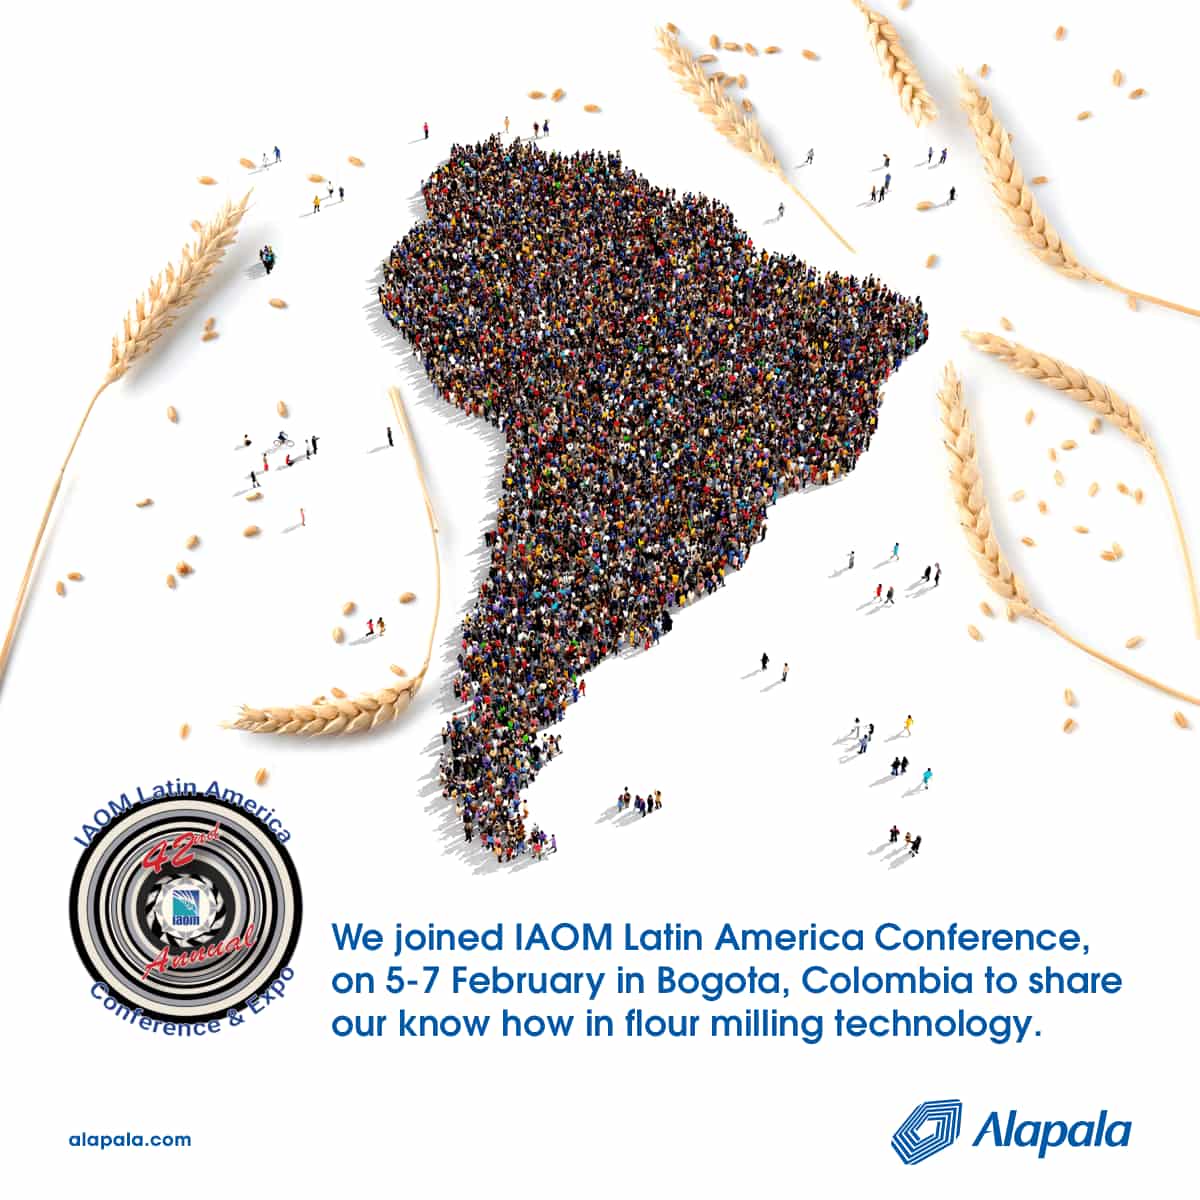 42nd Annual Latin America Region Conference & Expo